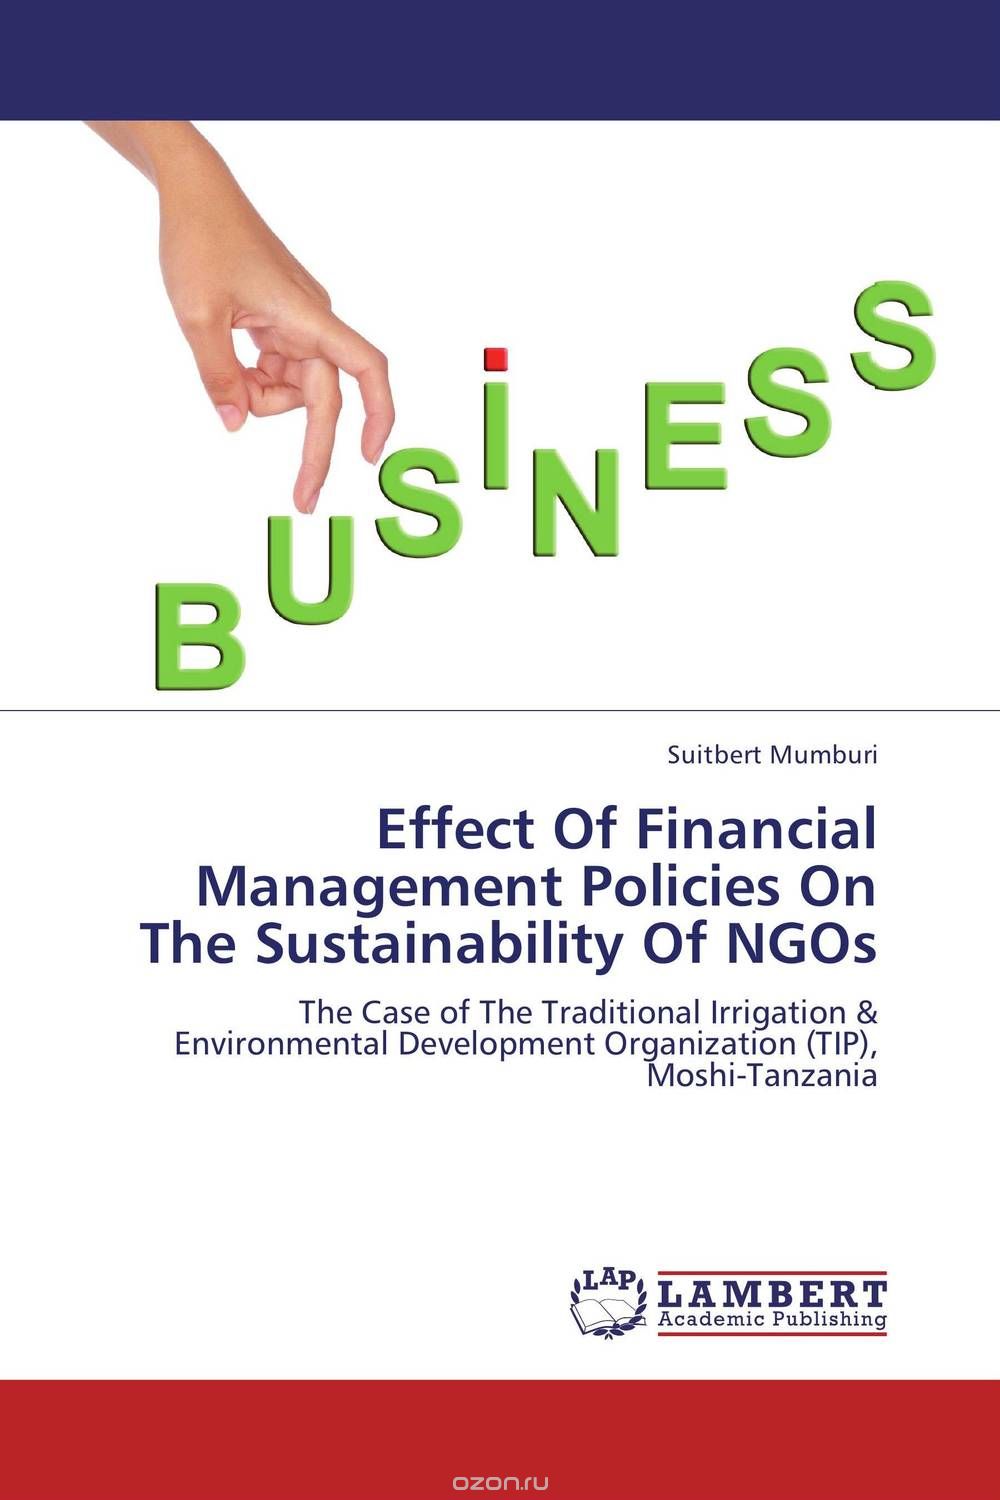 Скачать книгу "Effect Of Financial Management Policies On The Sustainability Of NGOs"